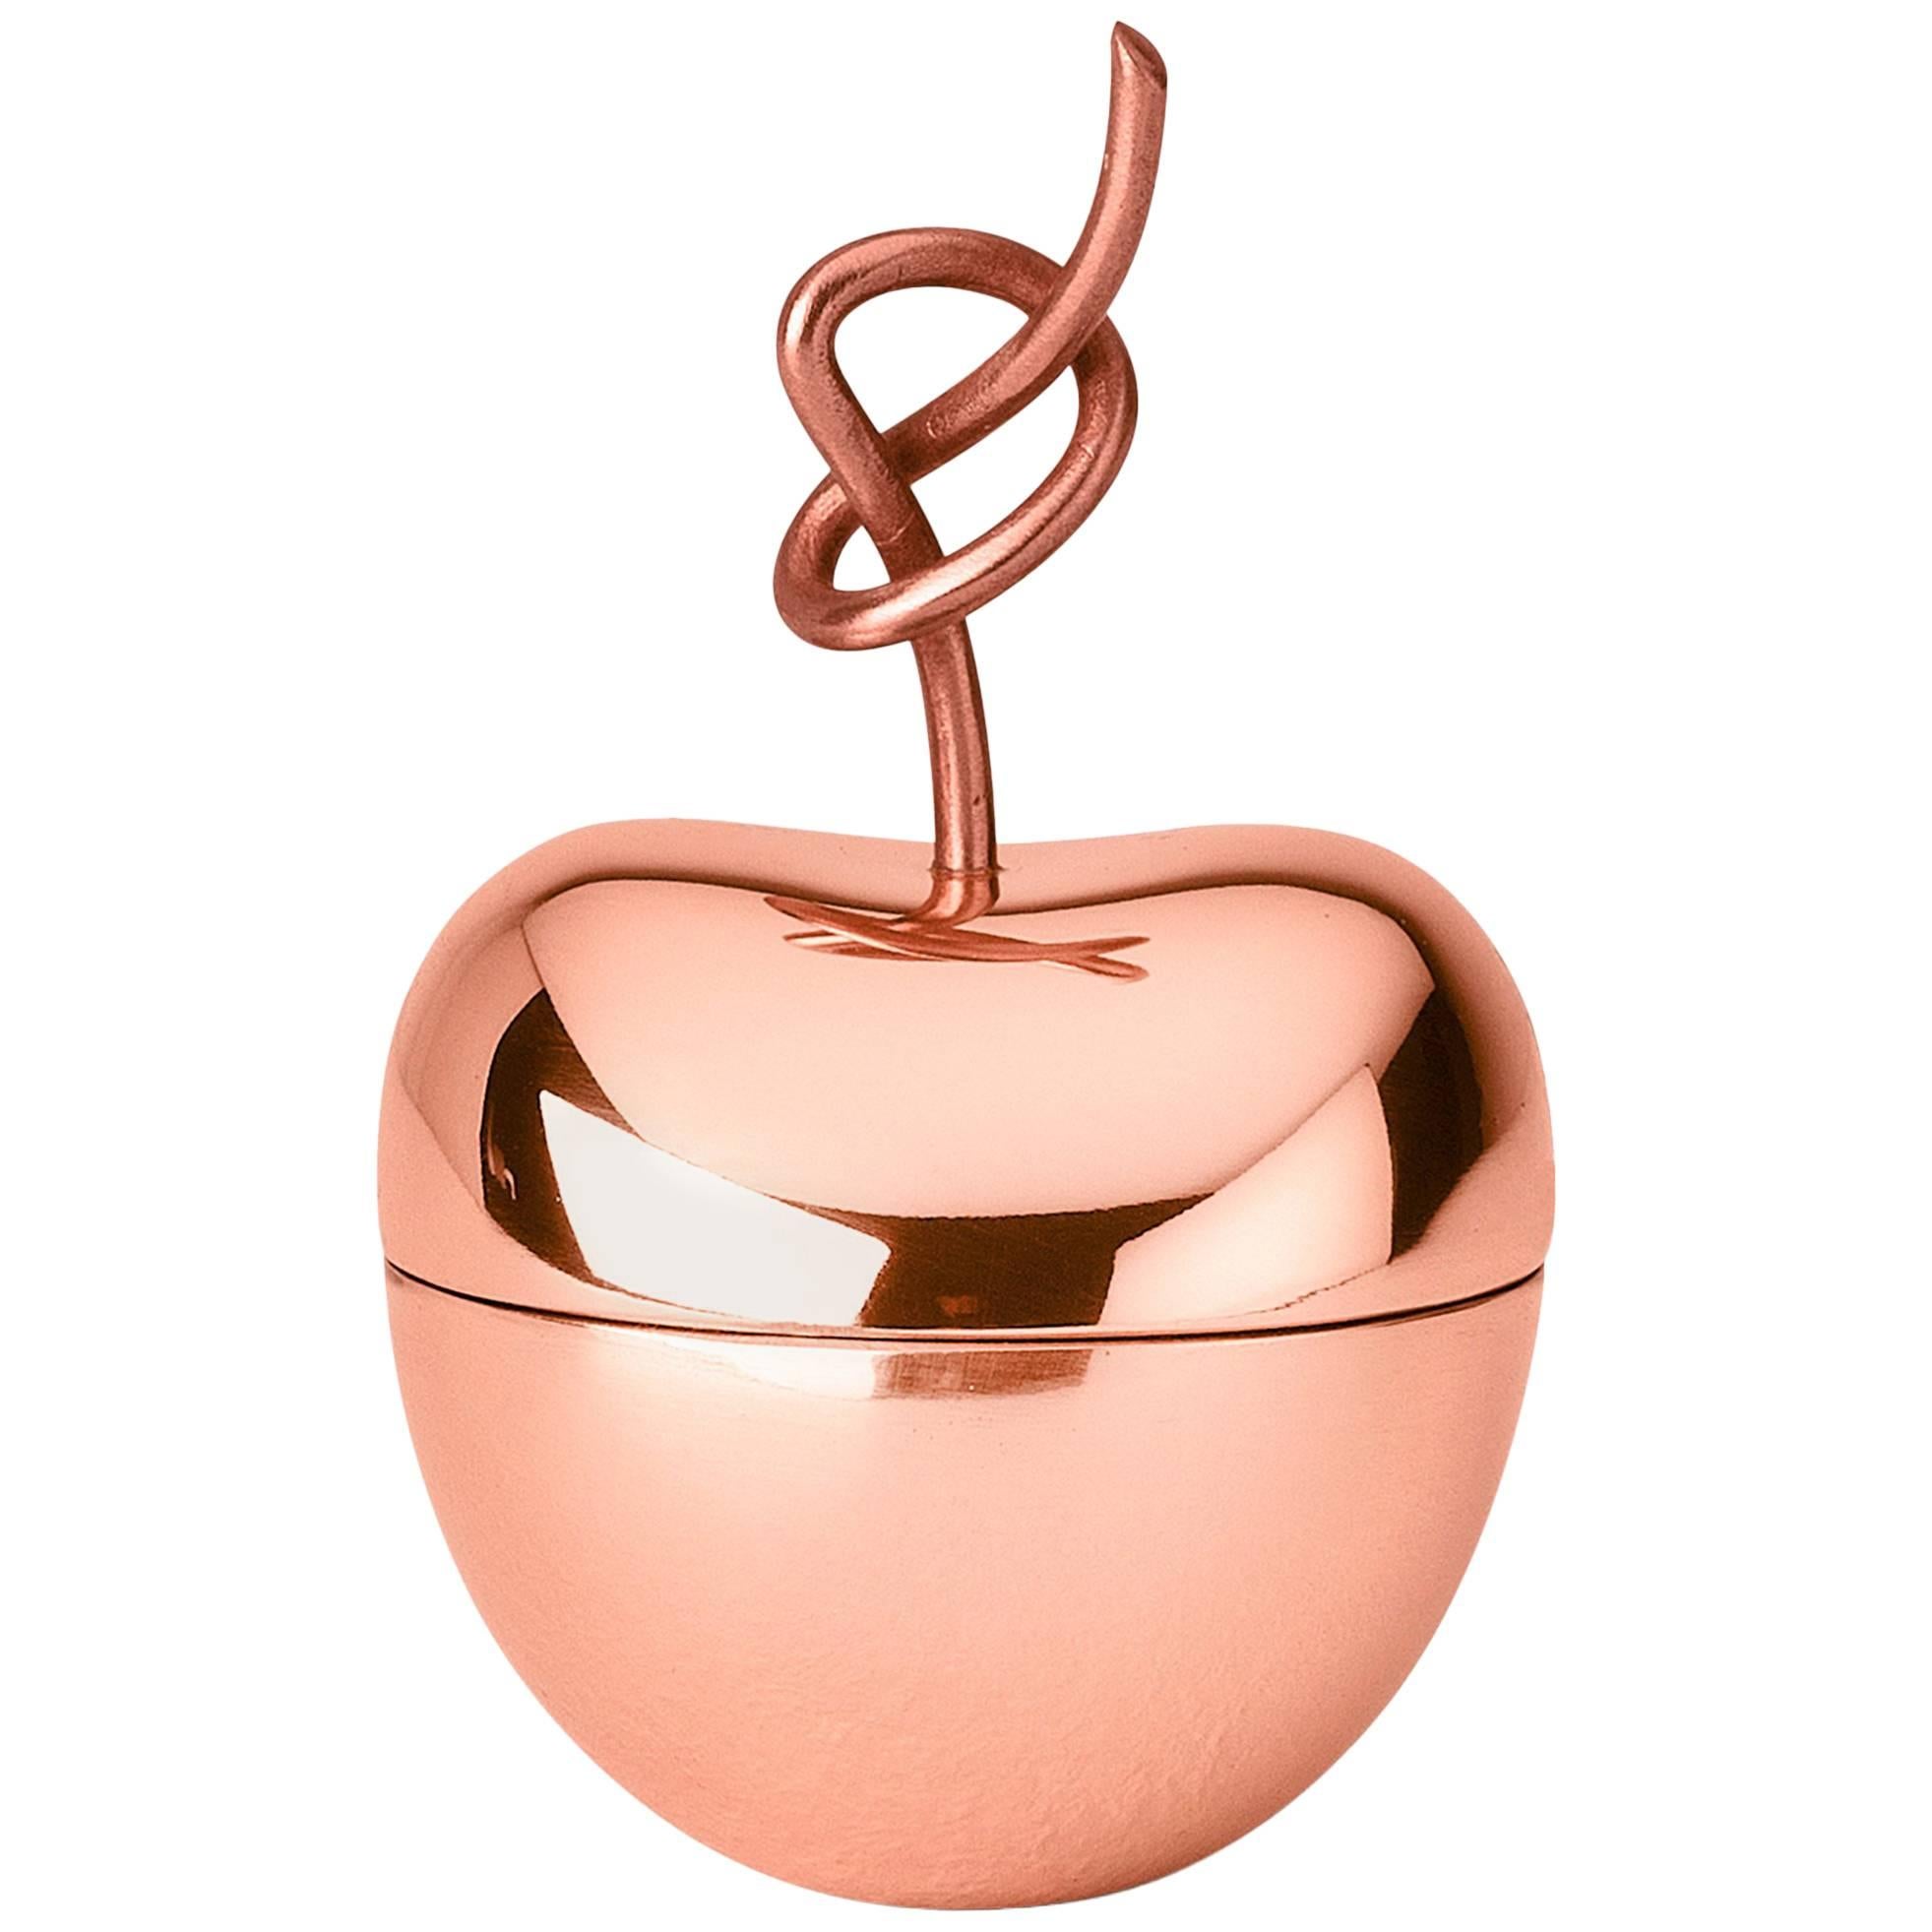 Ghidini 1961 Medium Knotted Cherry Box in Rose Gold Finish